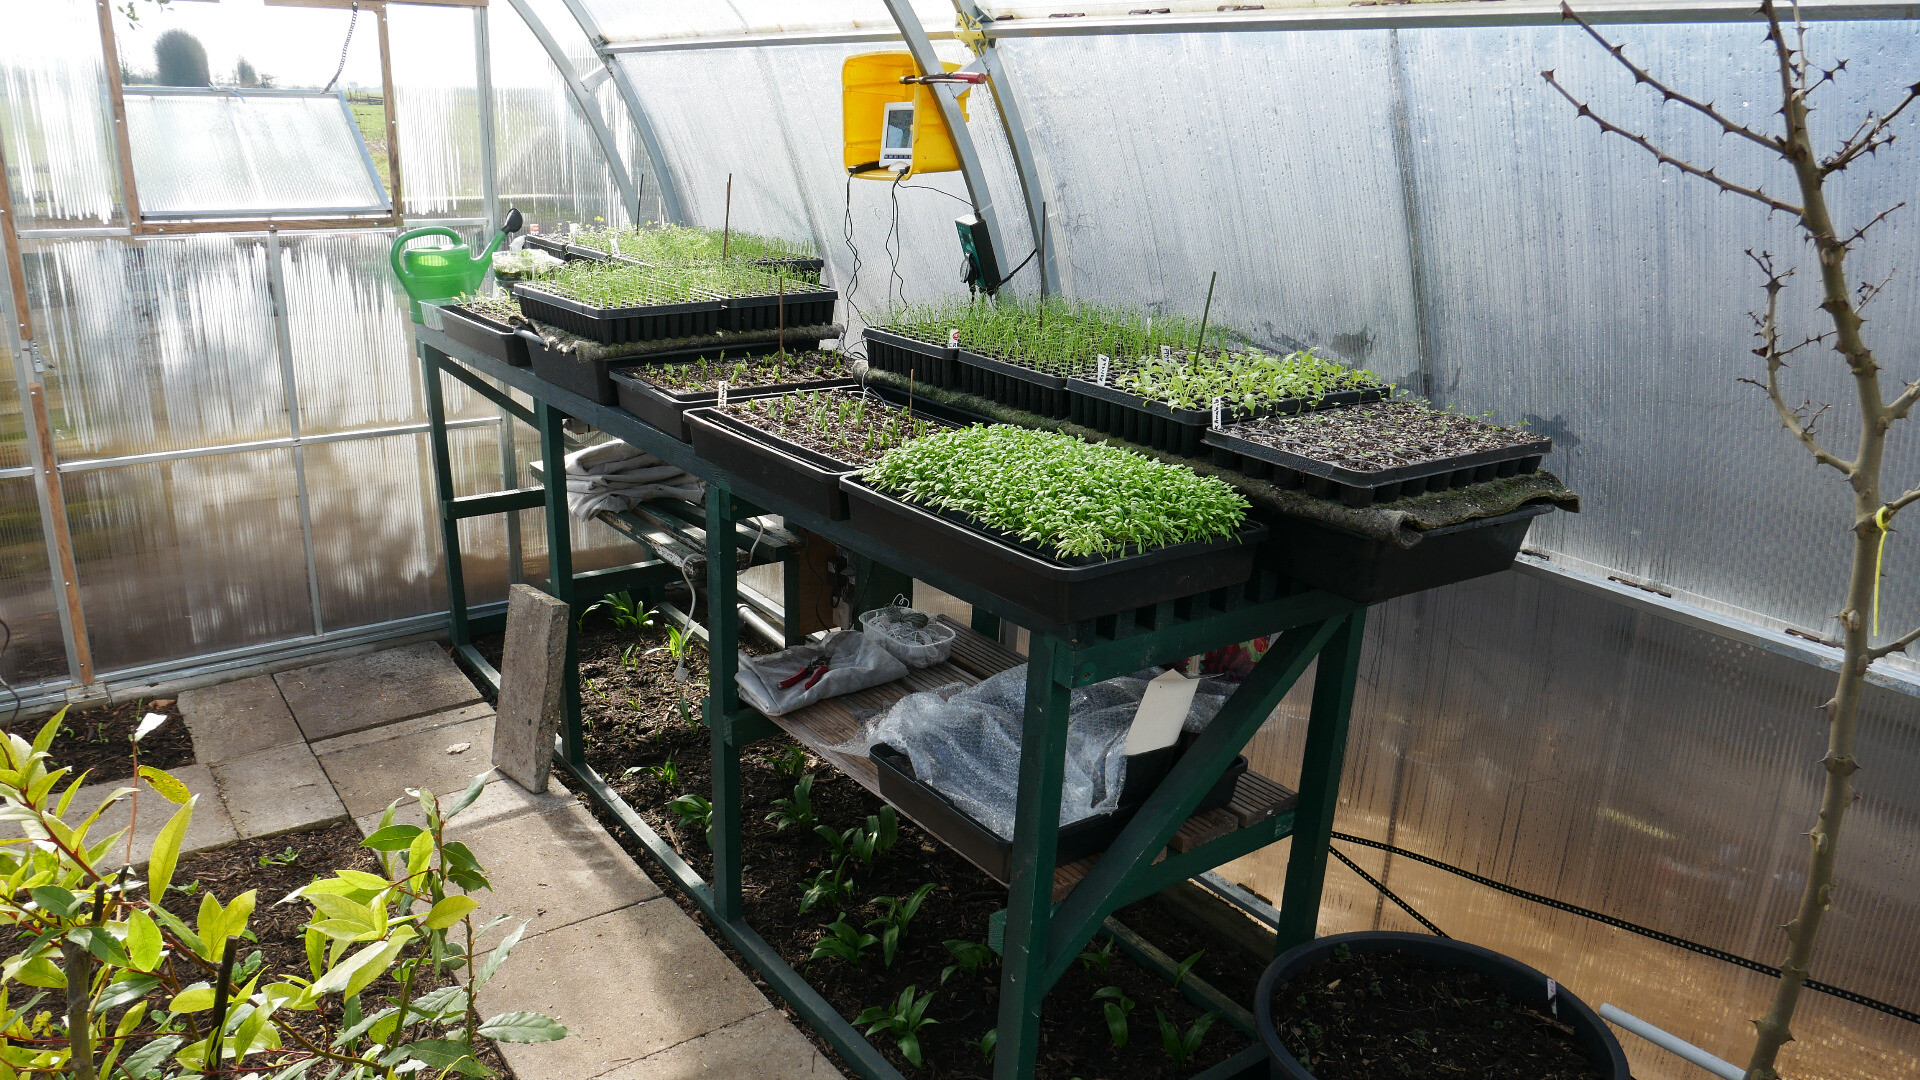 seed trays for propagation of seedlings on a workbench in a greenhouse; fresh wild garlic in bed under the workbench